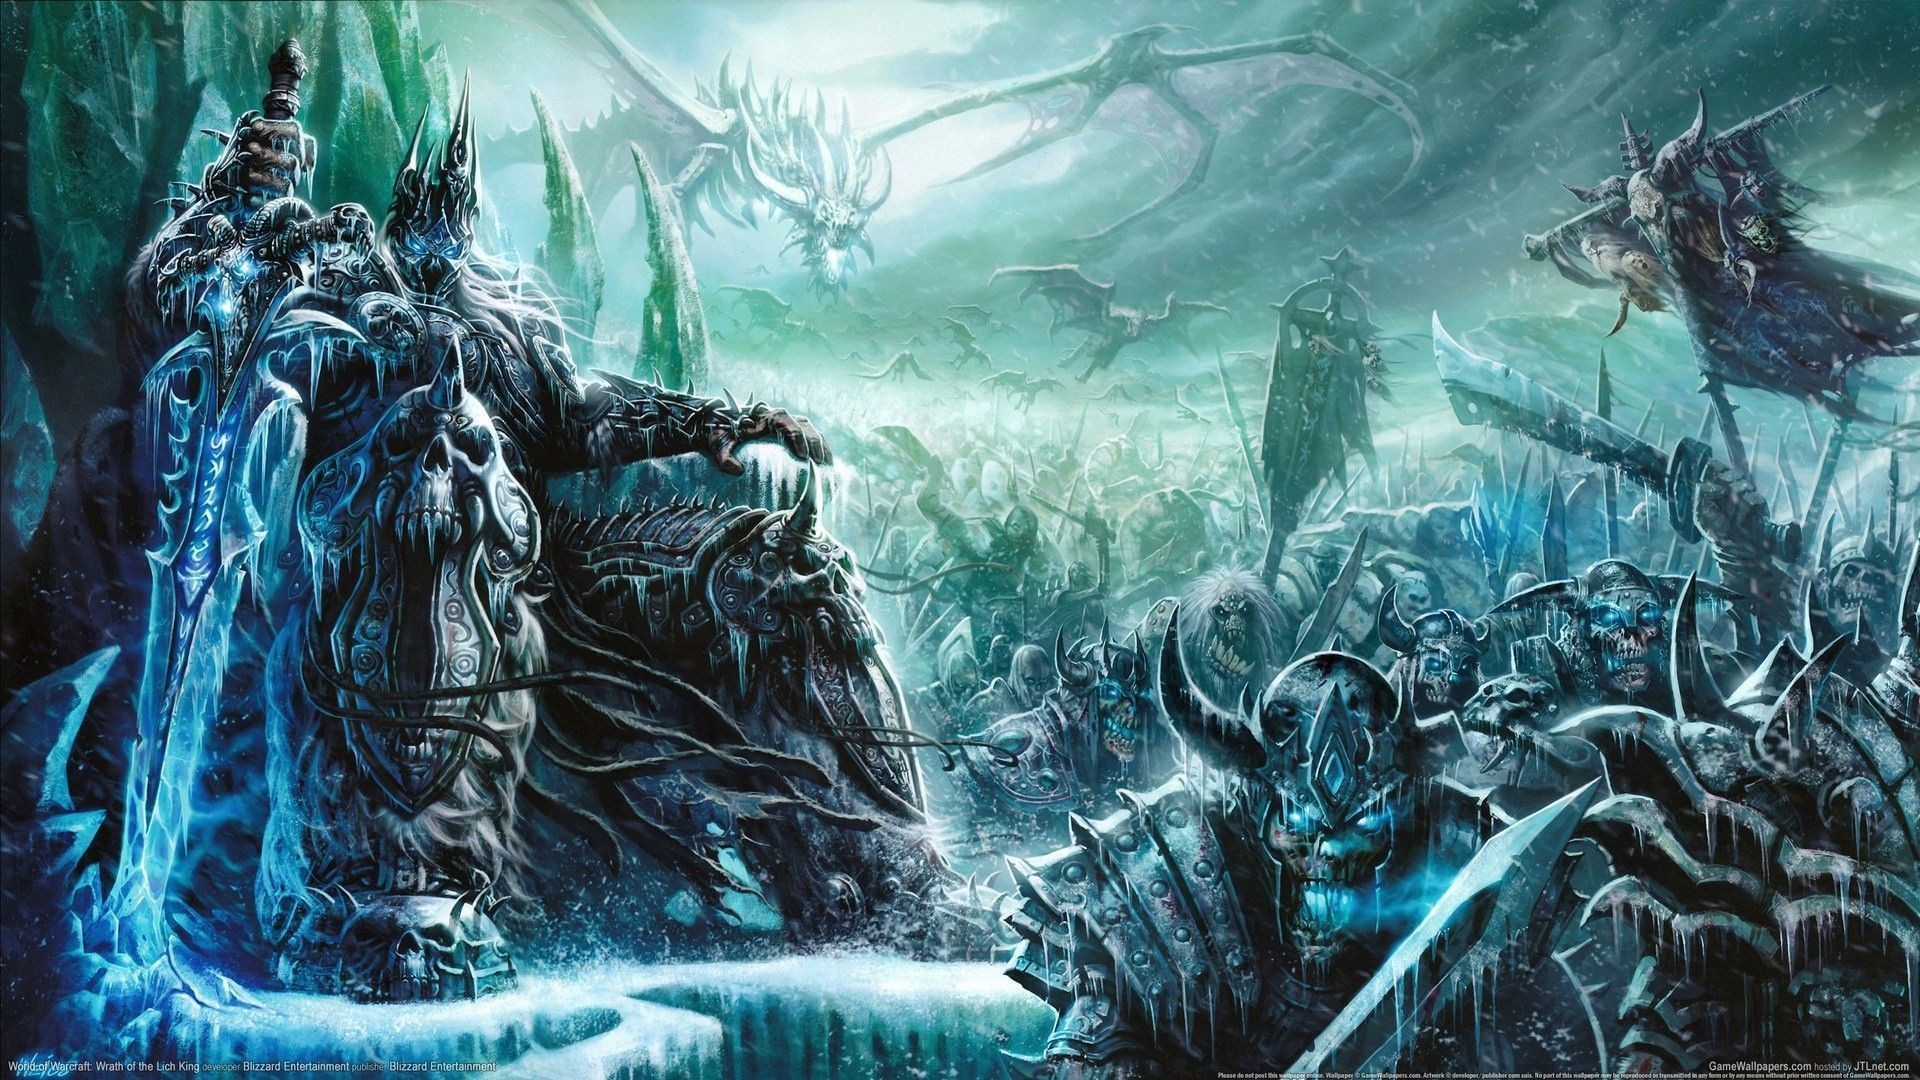 1920x1080, World Of Warcraft Wrath Of The Lich King - Lich King - HD Wallpaper 